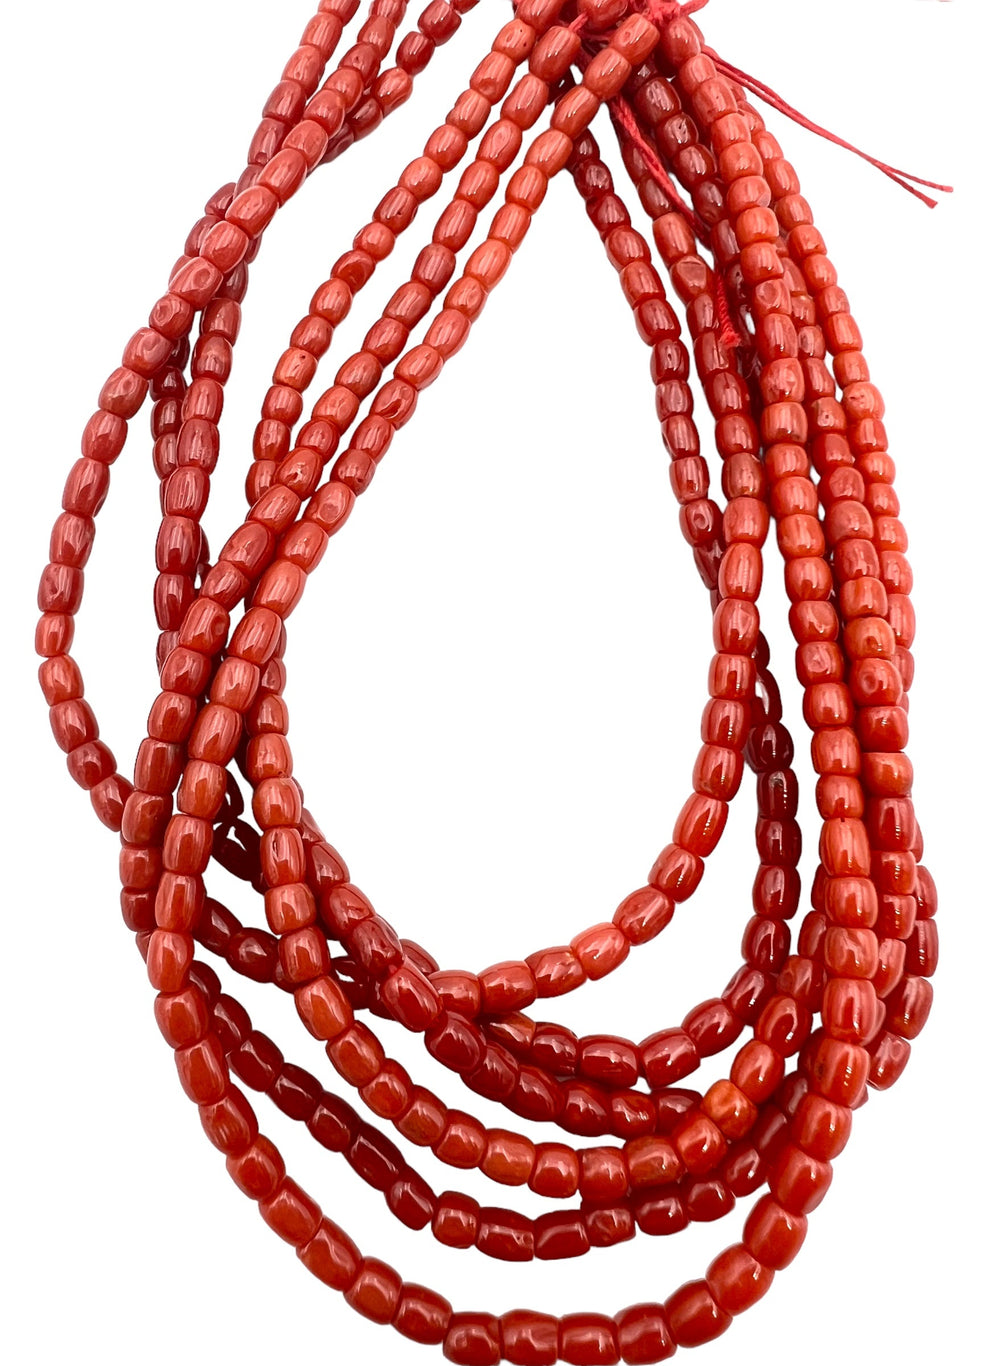 100% Natural High Quality Red Italian Sea Coral 4x3mm Barrel